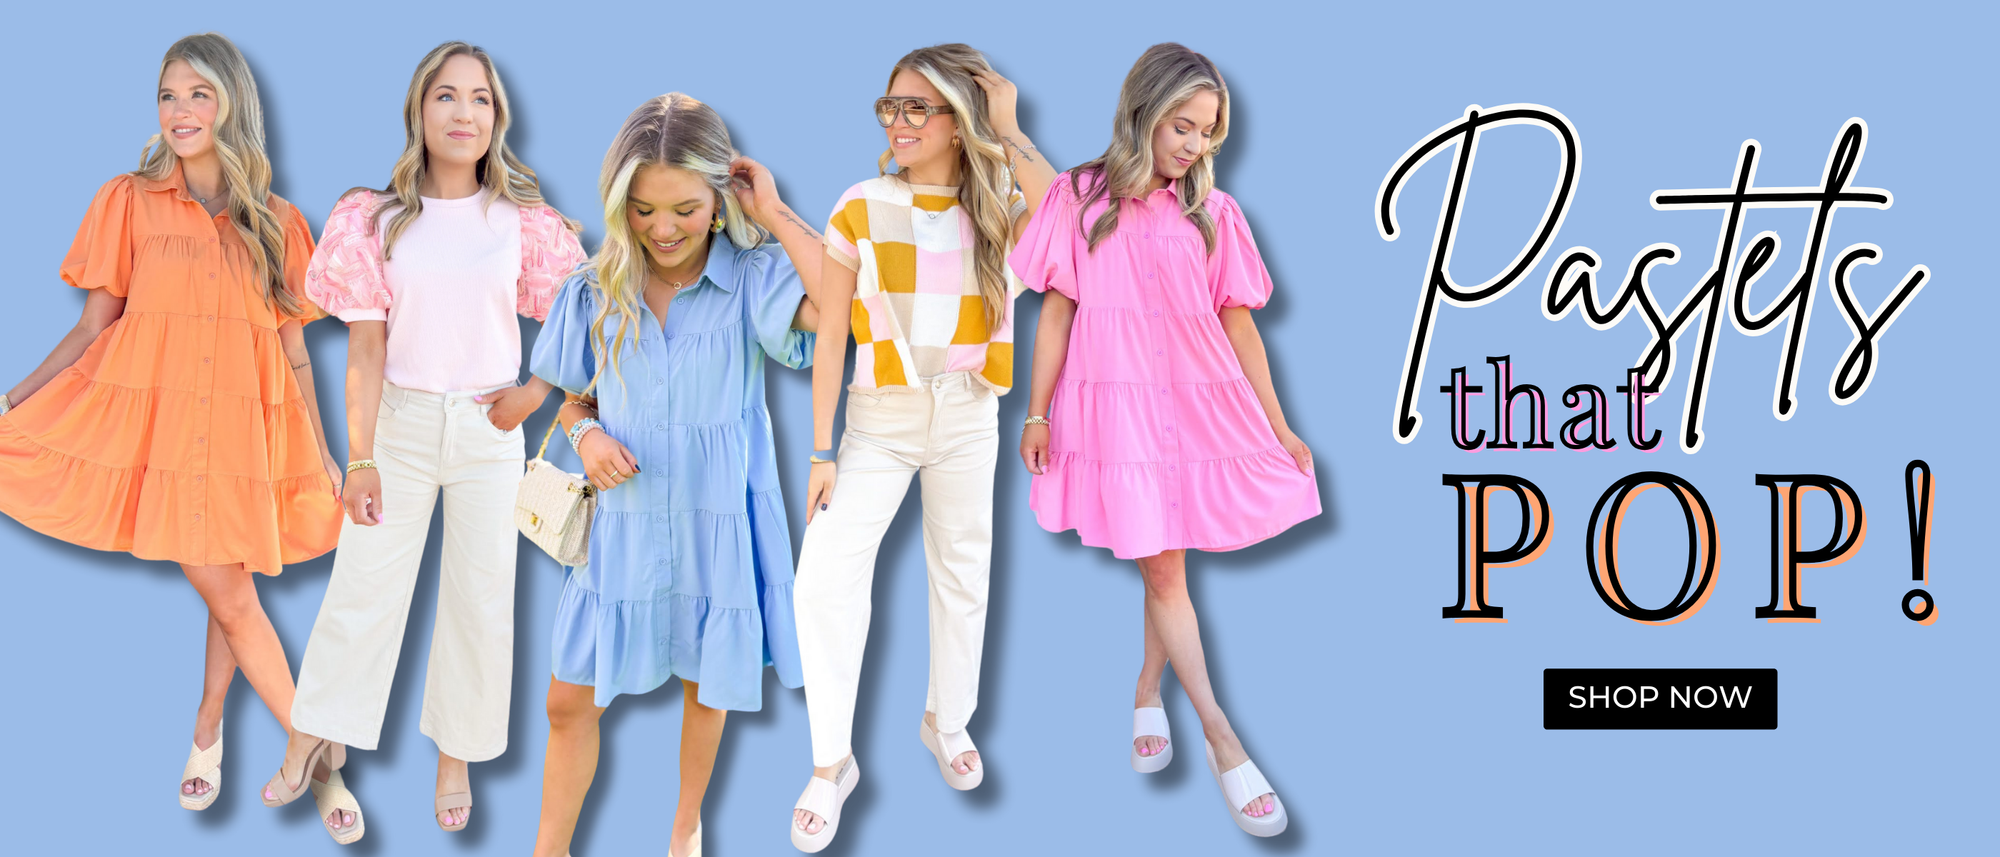 Pastels that pop! Featuring models in multiple styles including a mini dress with tiers and short-puff sleeves in shades of pink, orange and light blue. Models wearing wide leg off white jeans styled with a checked sleeveless sweater top and a top with puffy sleeves with pink sheer detail.